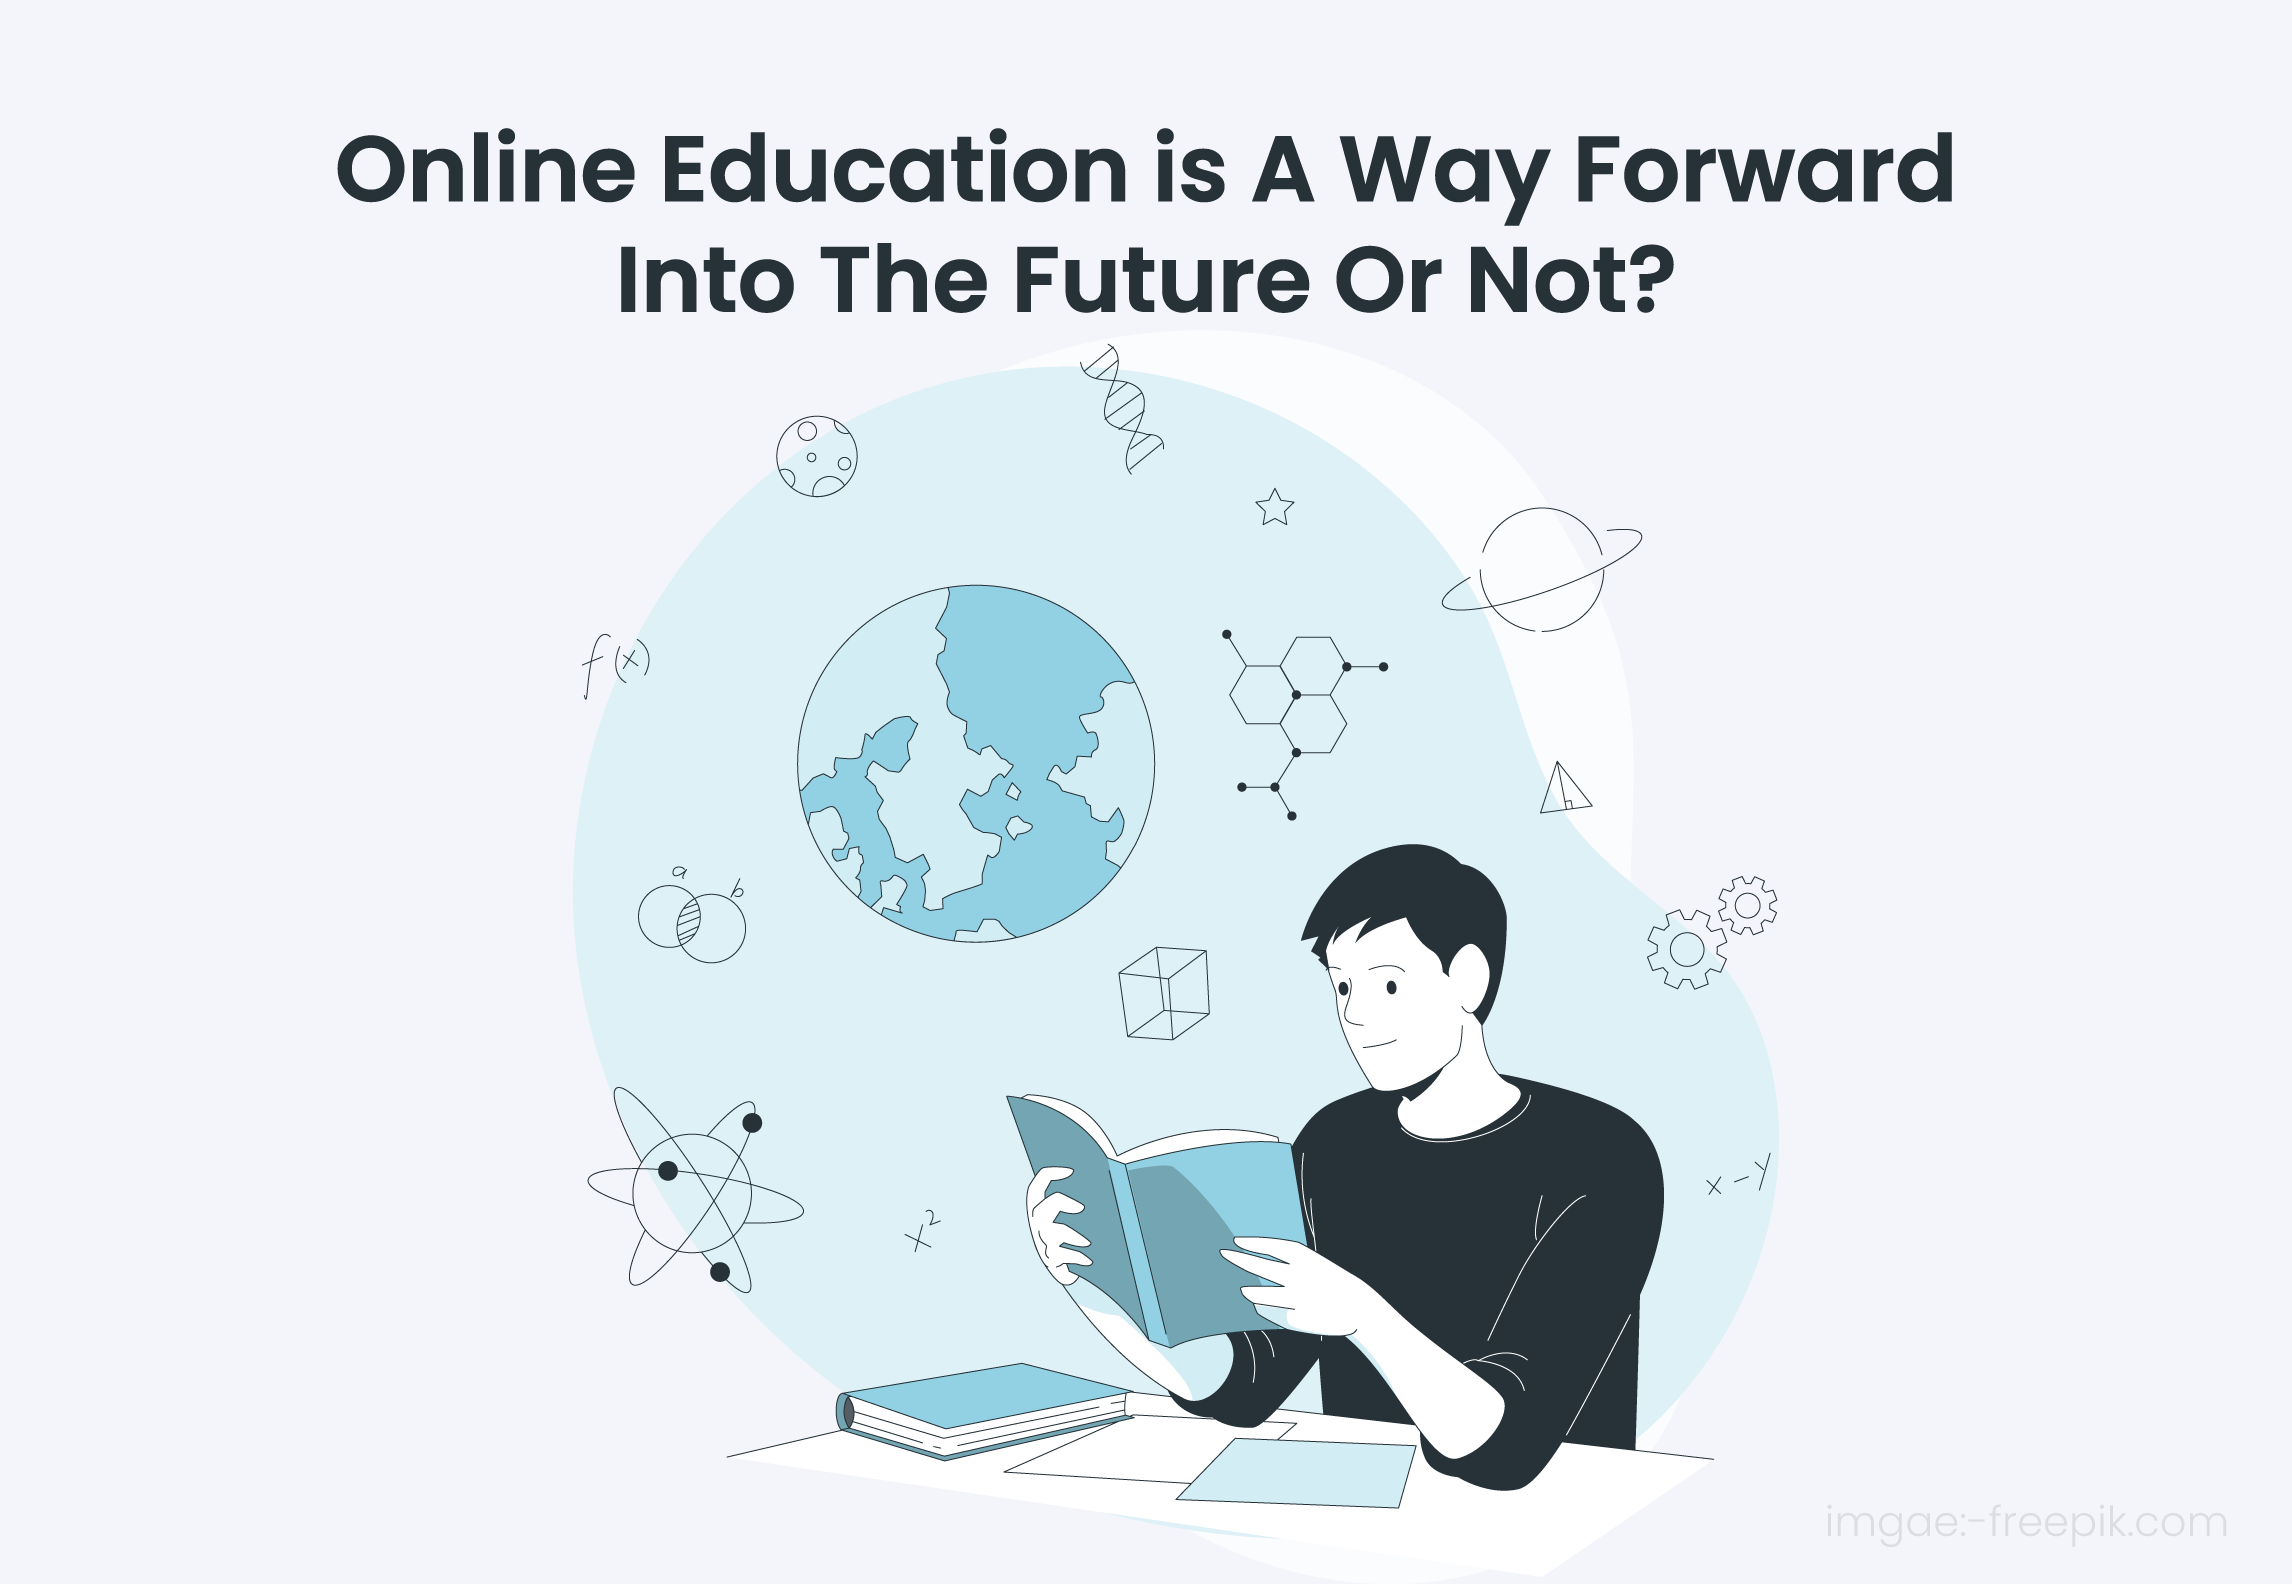 Online Education: Is this the future of Education?